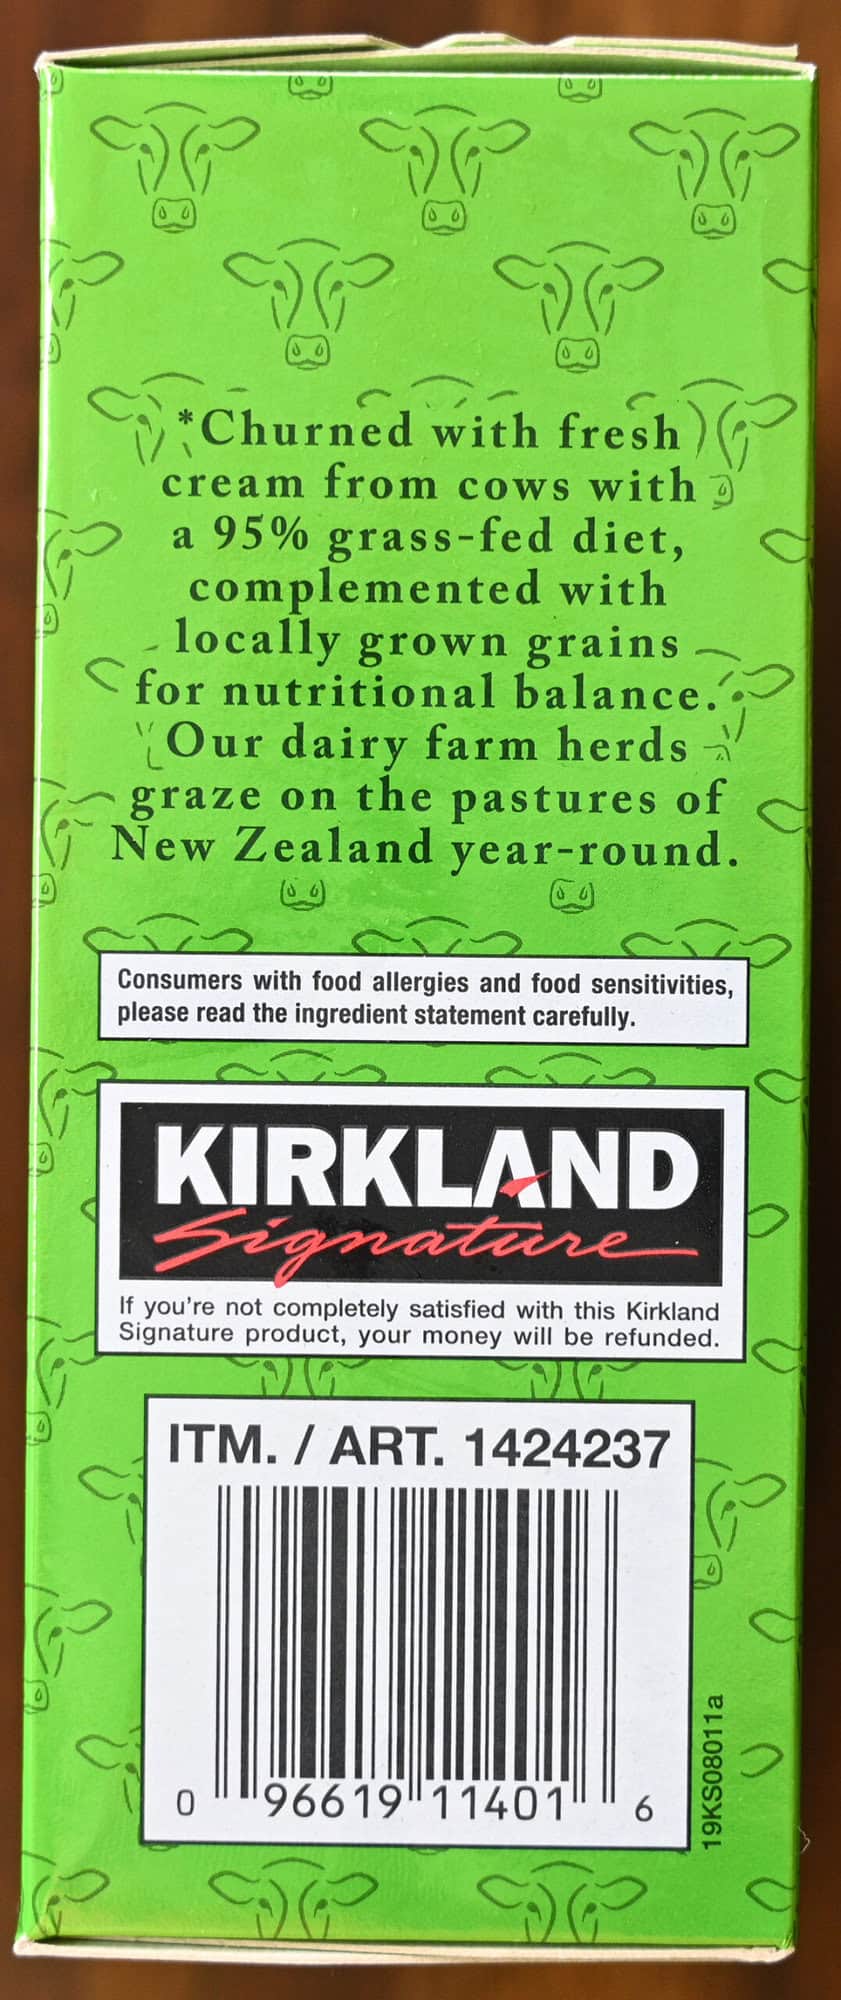 Image of the back of the box of the butter showing the product description for the butter. 